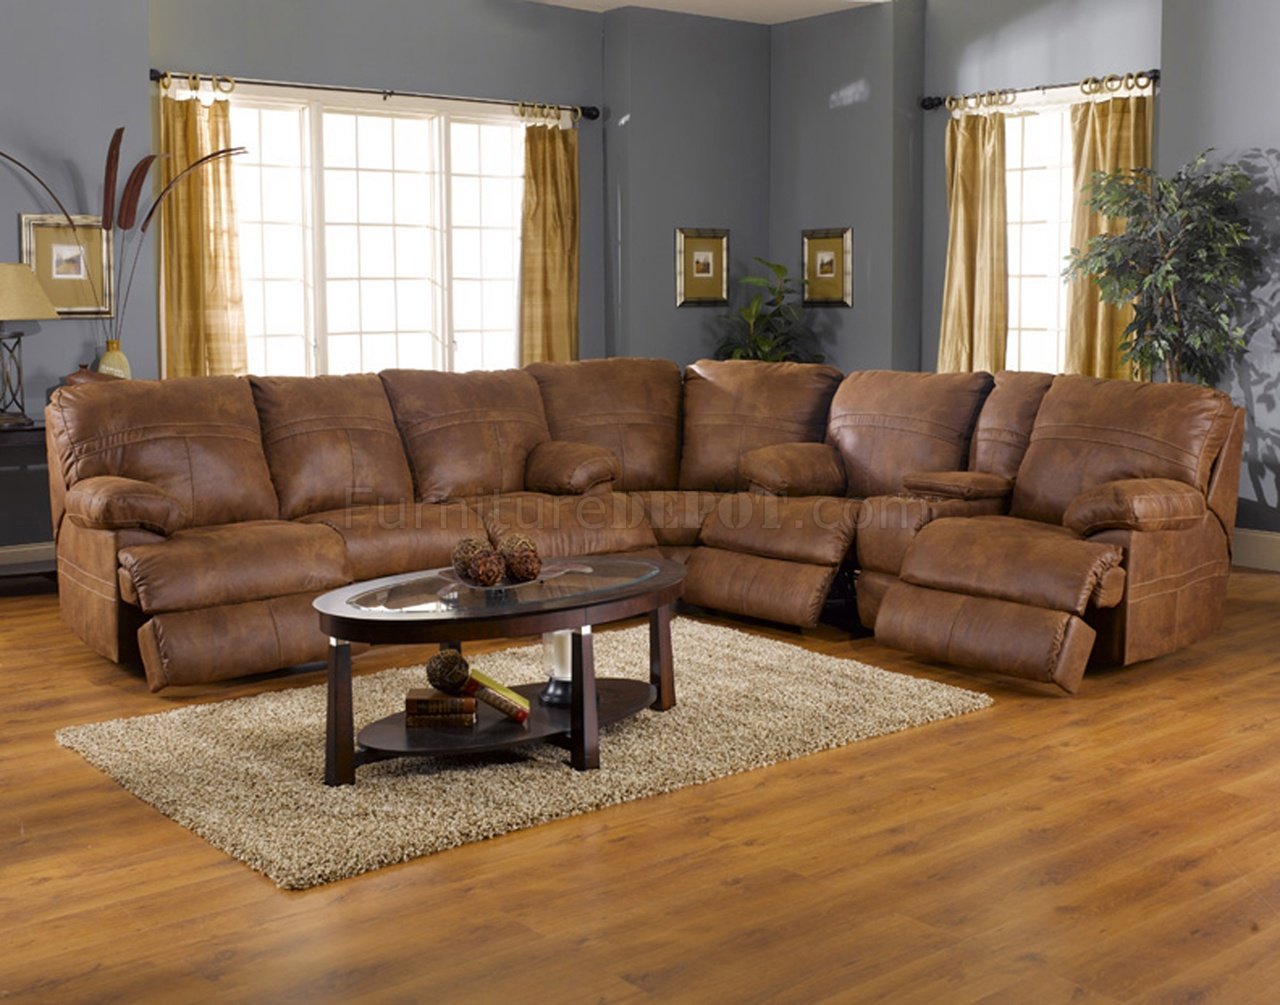 Rich Tanner Faux Leather Fabric Ranger, Faux Leather Sectional